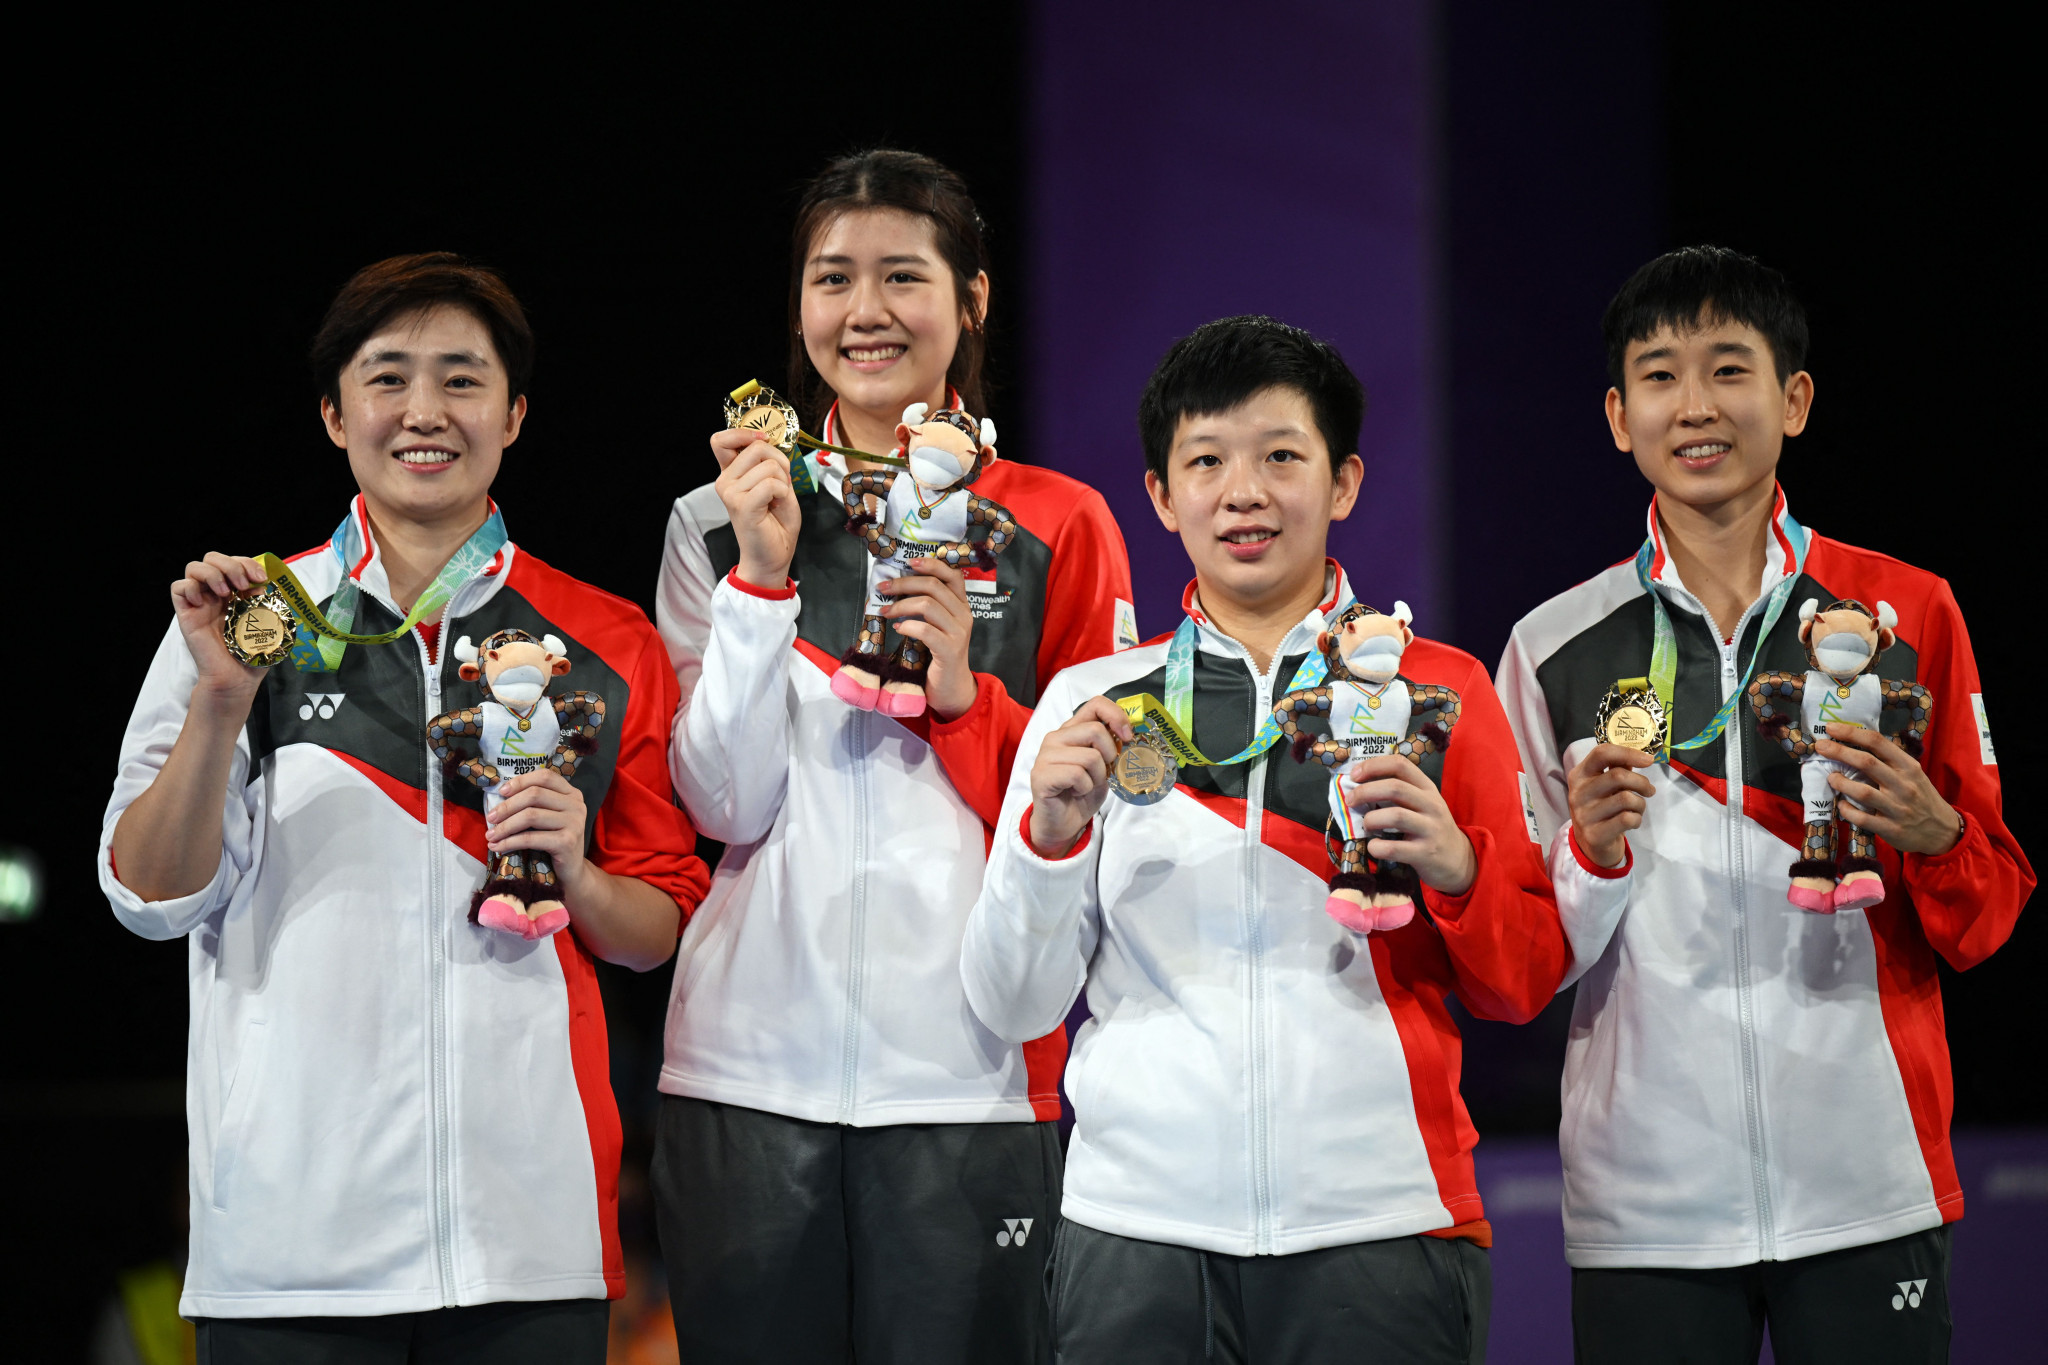 Singapore won the women's team table tennis tournament, earning the nation's 23rd Commonwealth Games gold medal in the sport ©Getty Images